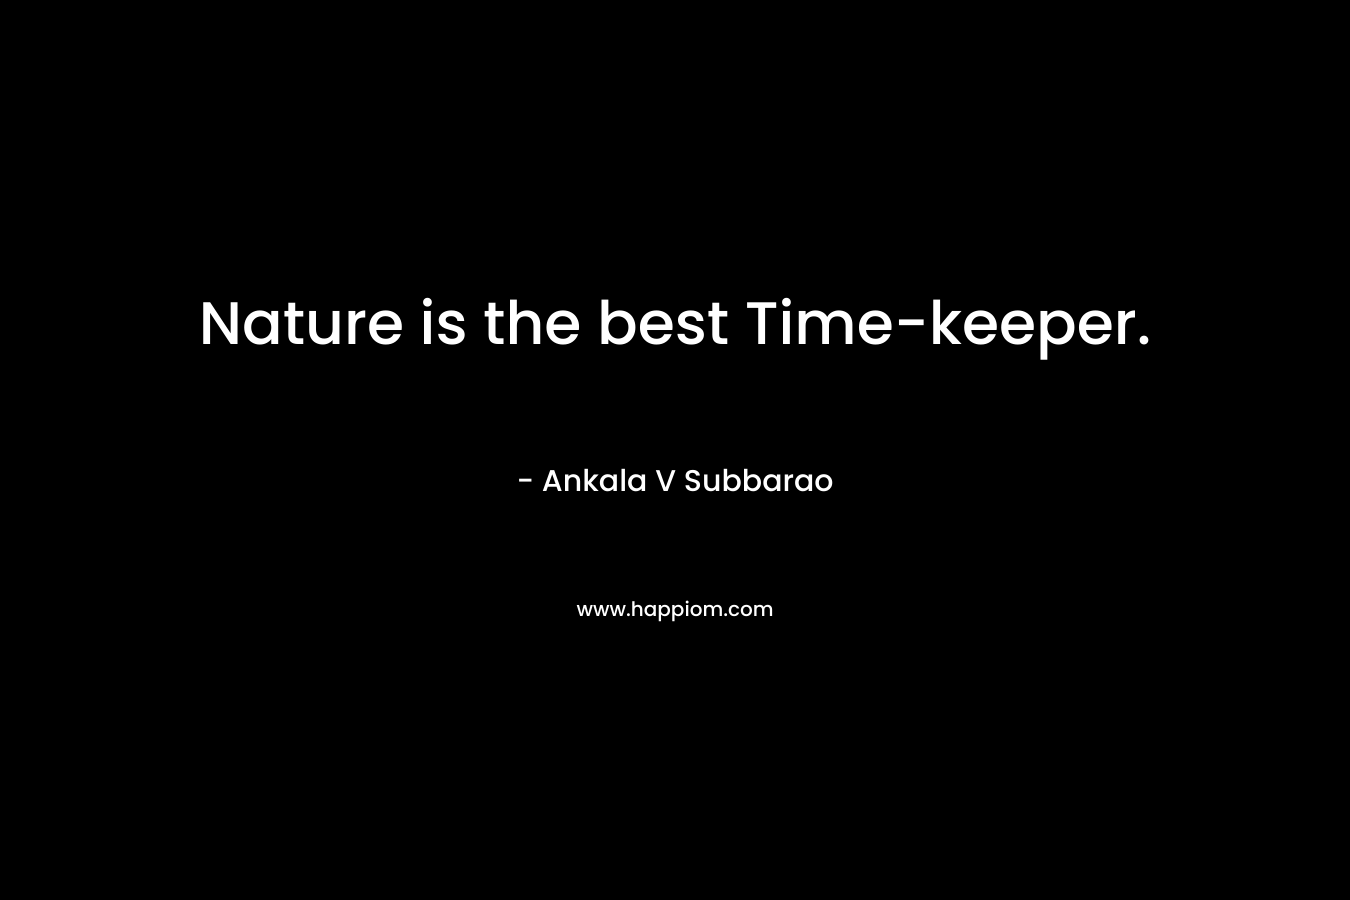 Nature is the best Time-keeper.